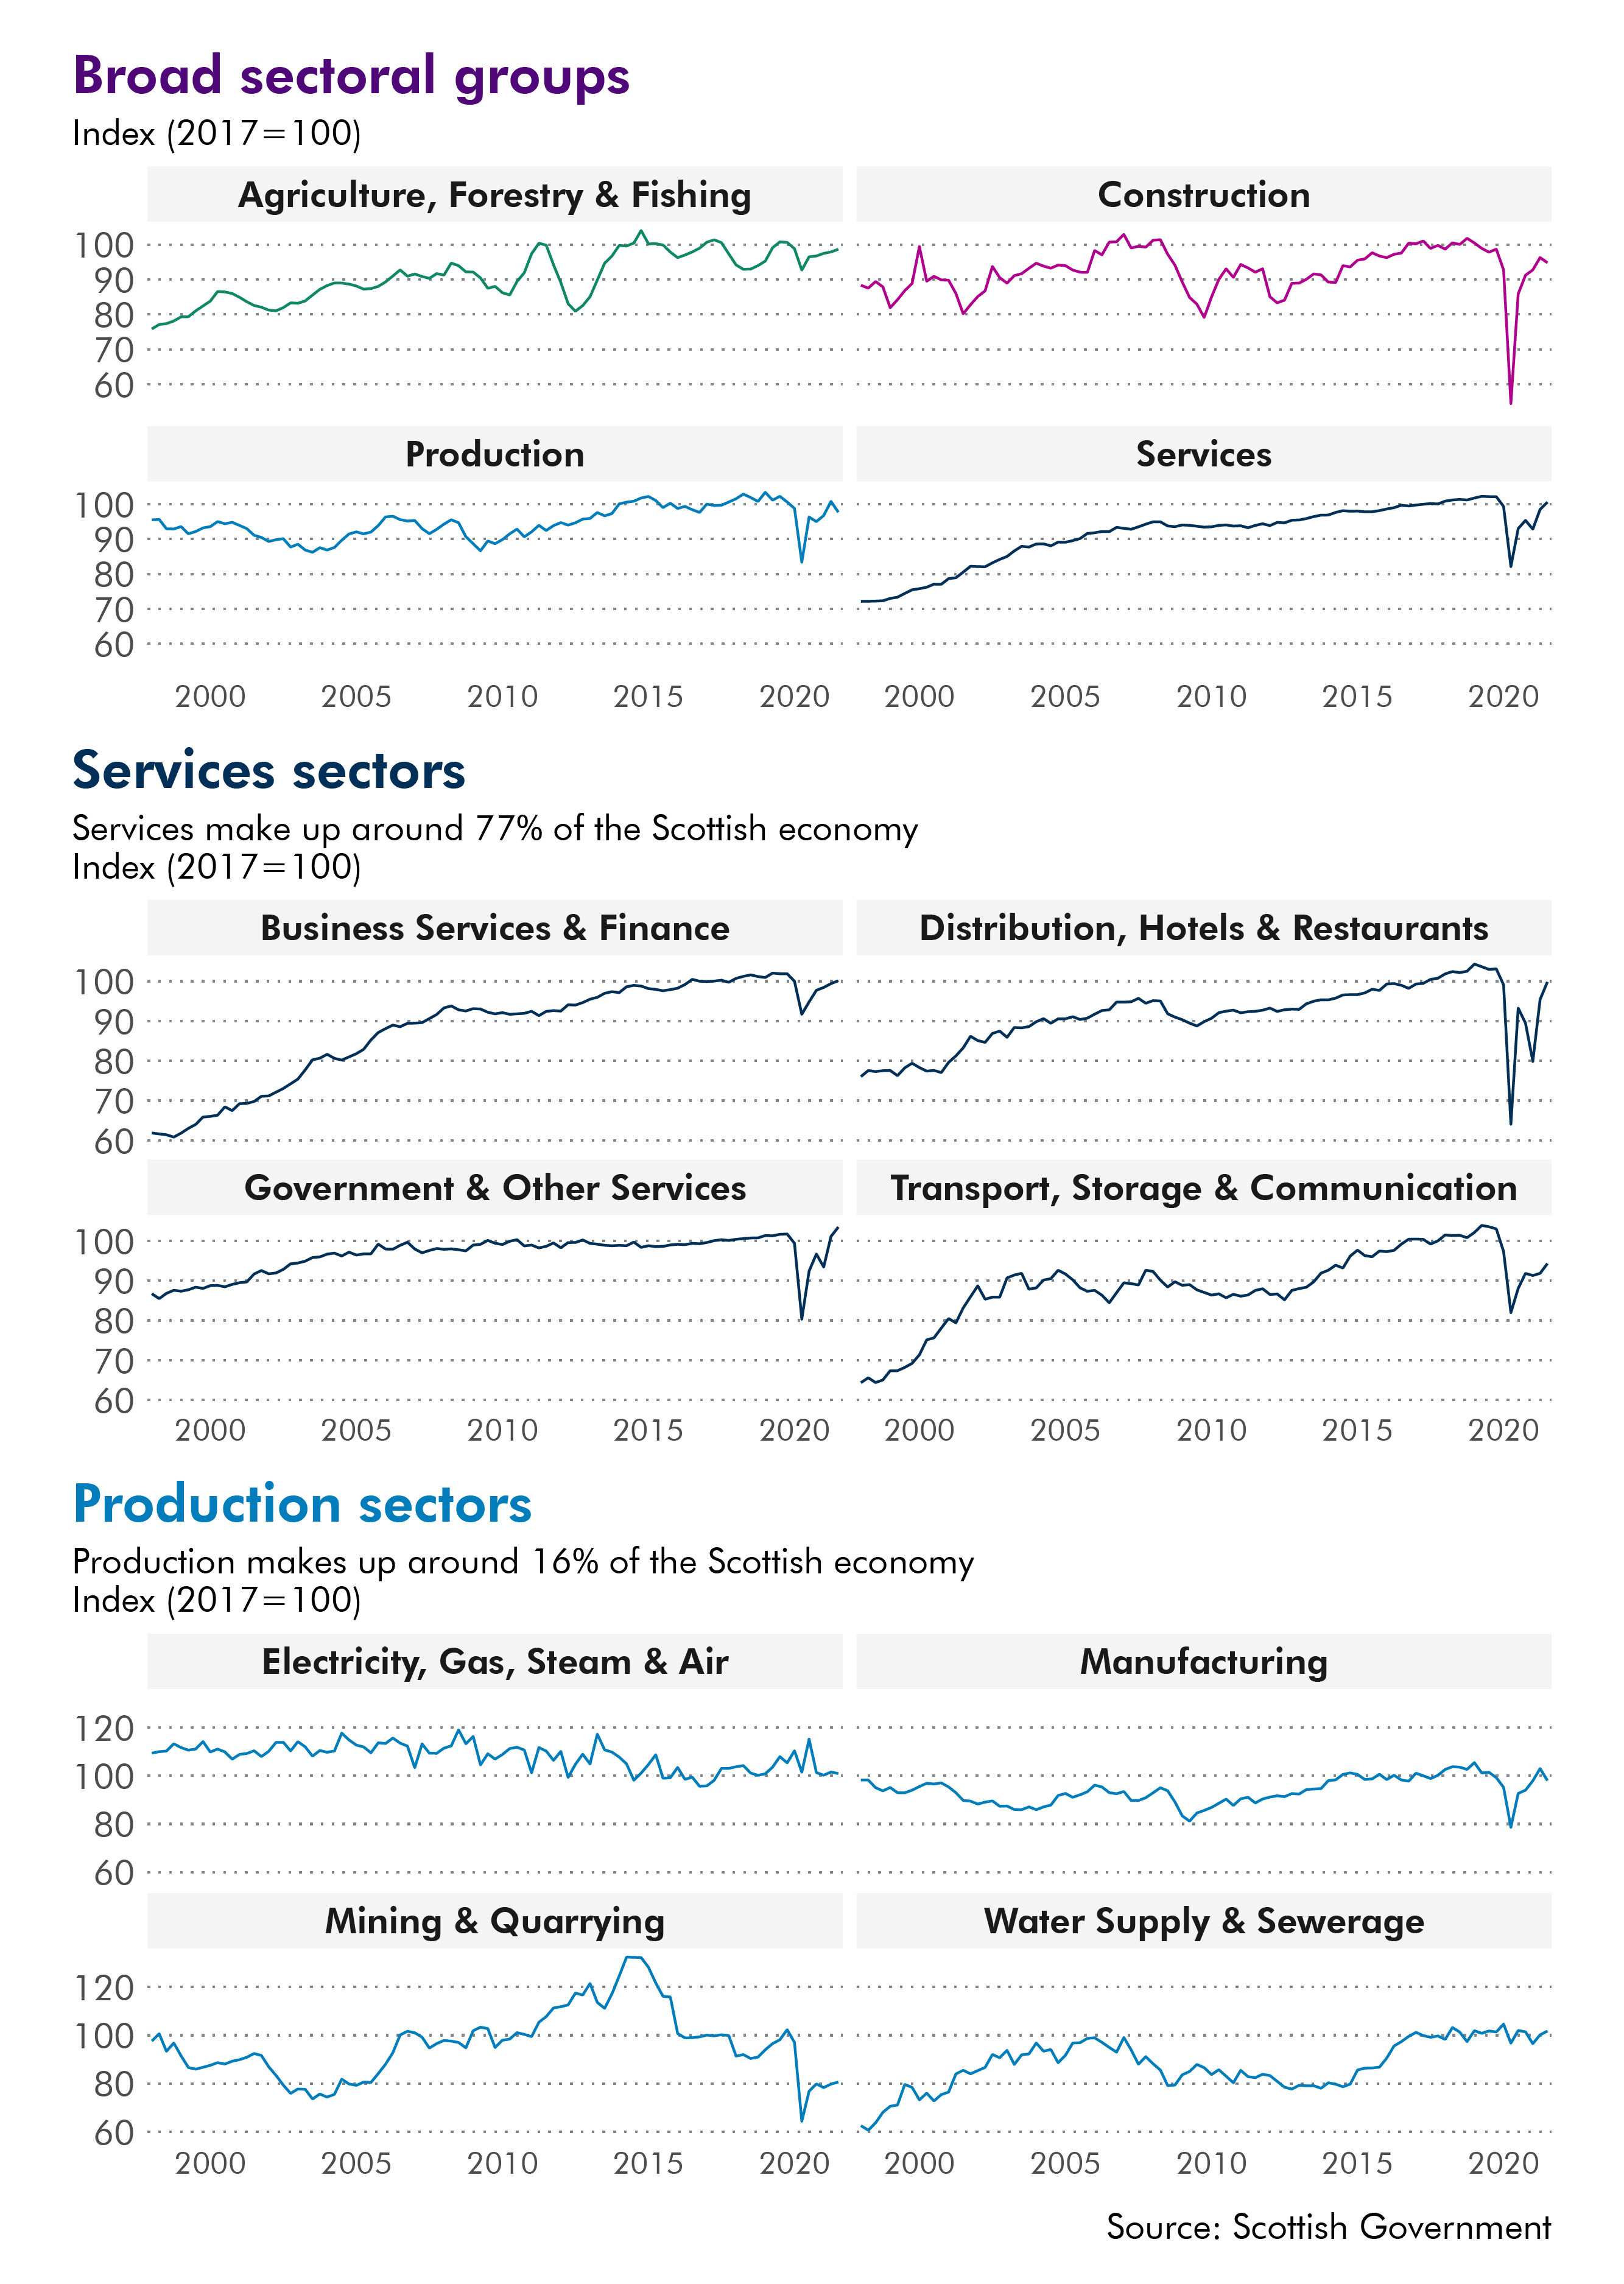 Twelve line charts showing economic out put growth by sector.Four showing the growth for the high level sectors, four showing services sub sectors and four showing the production sub sectors. The data for this image can be downloaded from the link below.